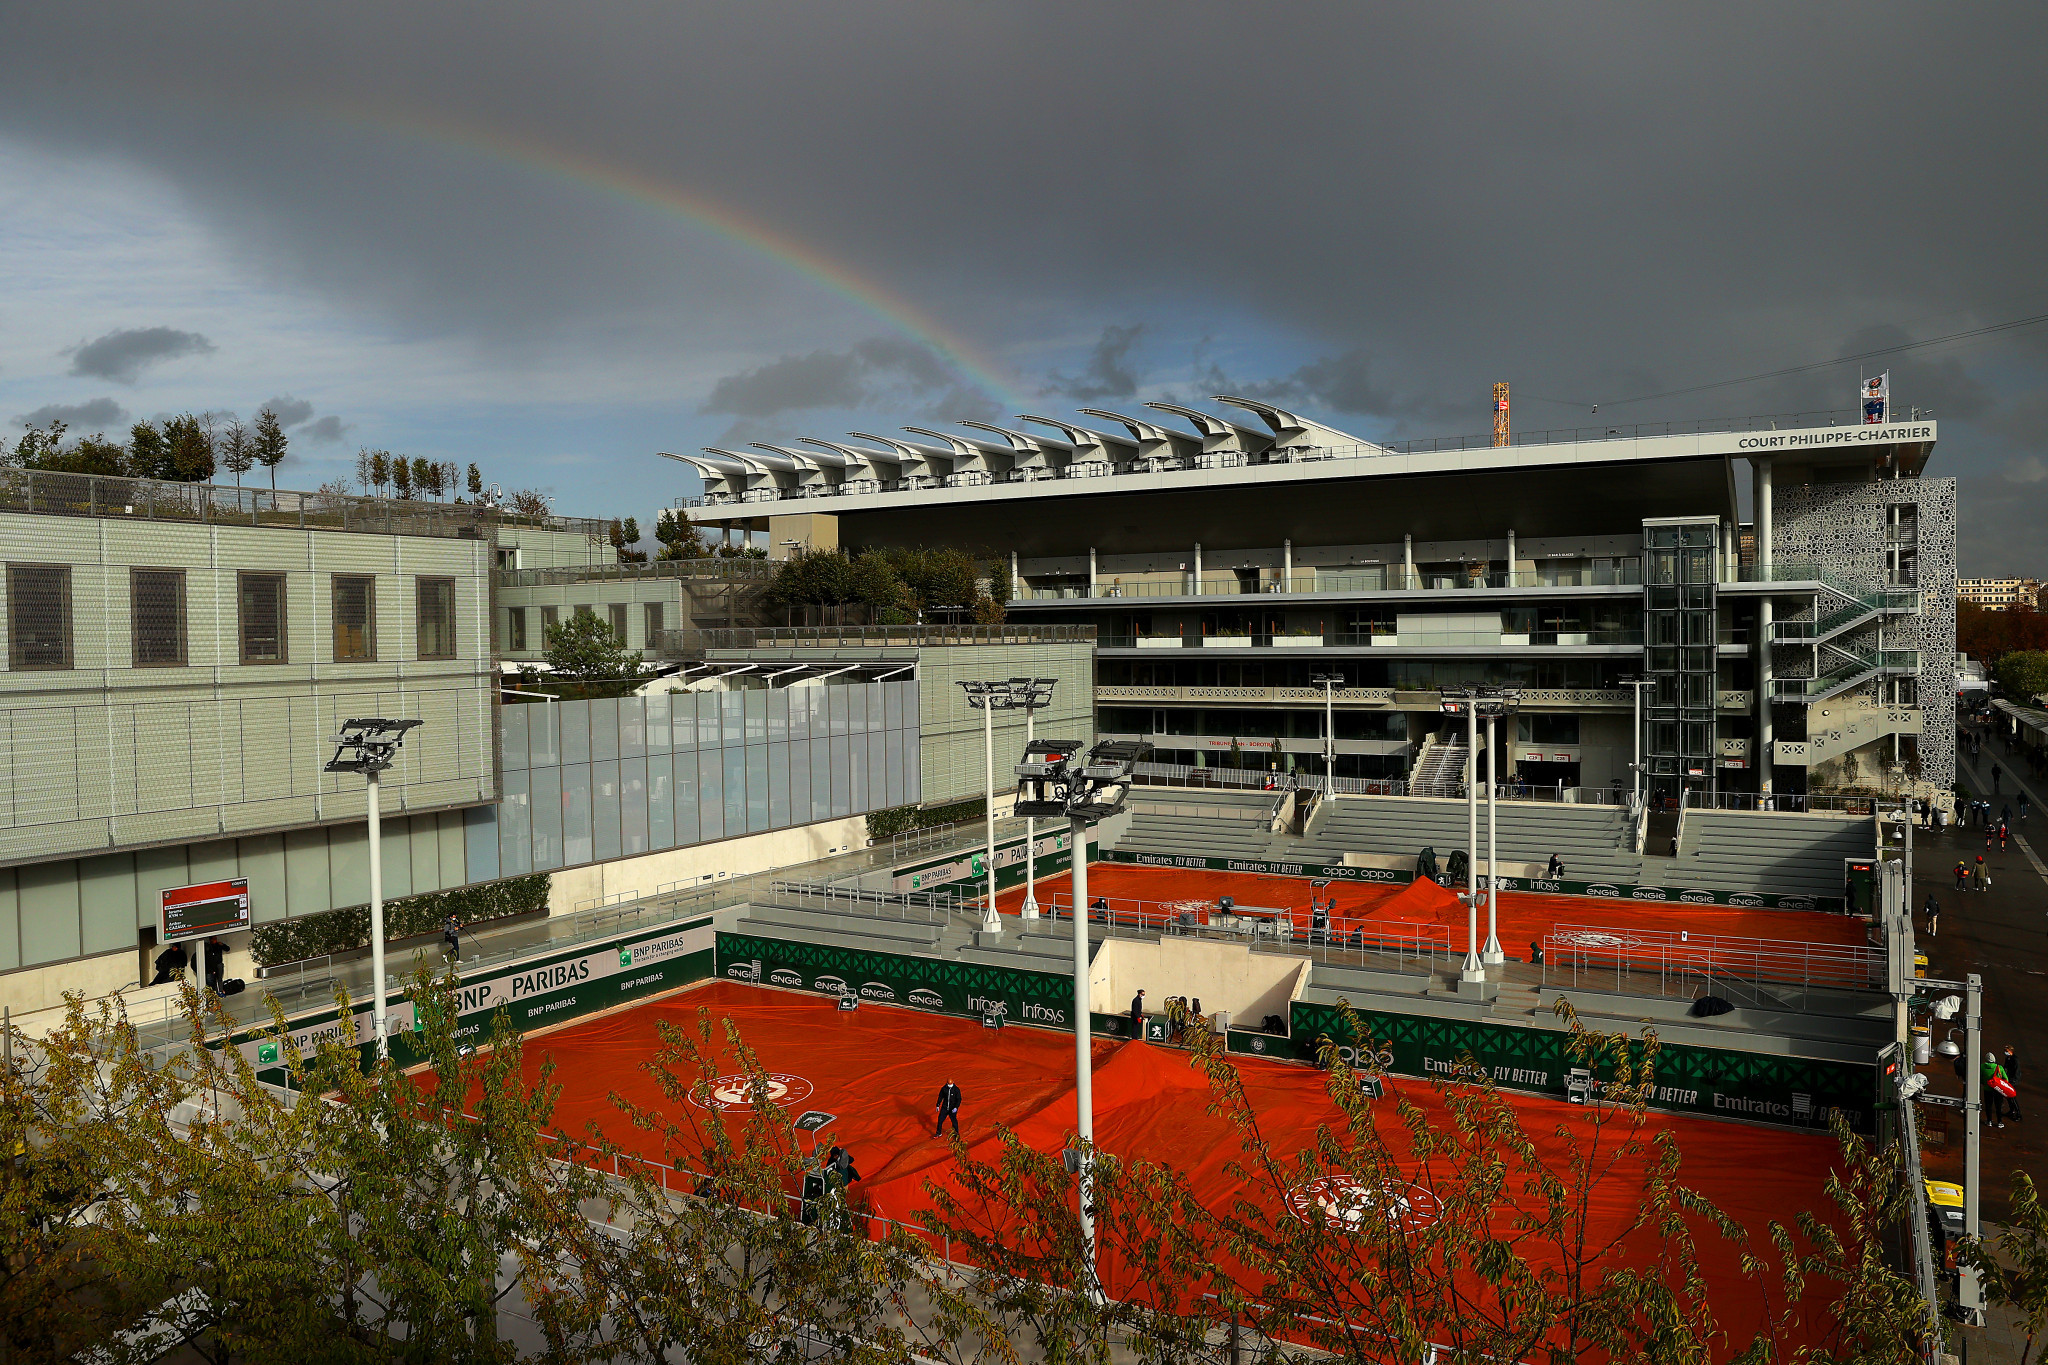 On a variable day of weather, a rainbow could be seen over the Roland Garros complex ©Getty Images